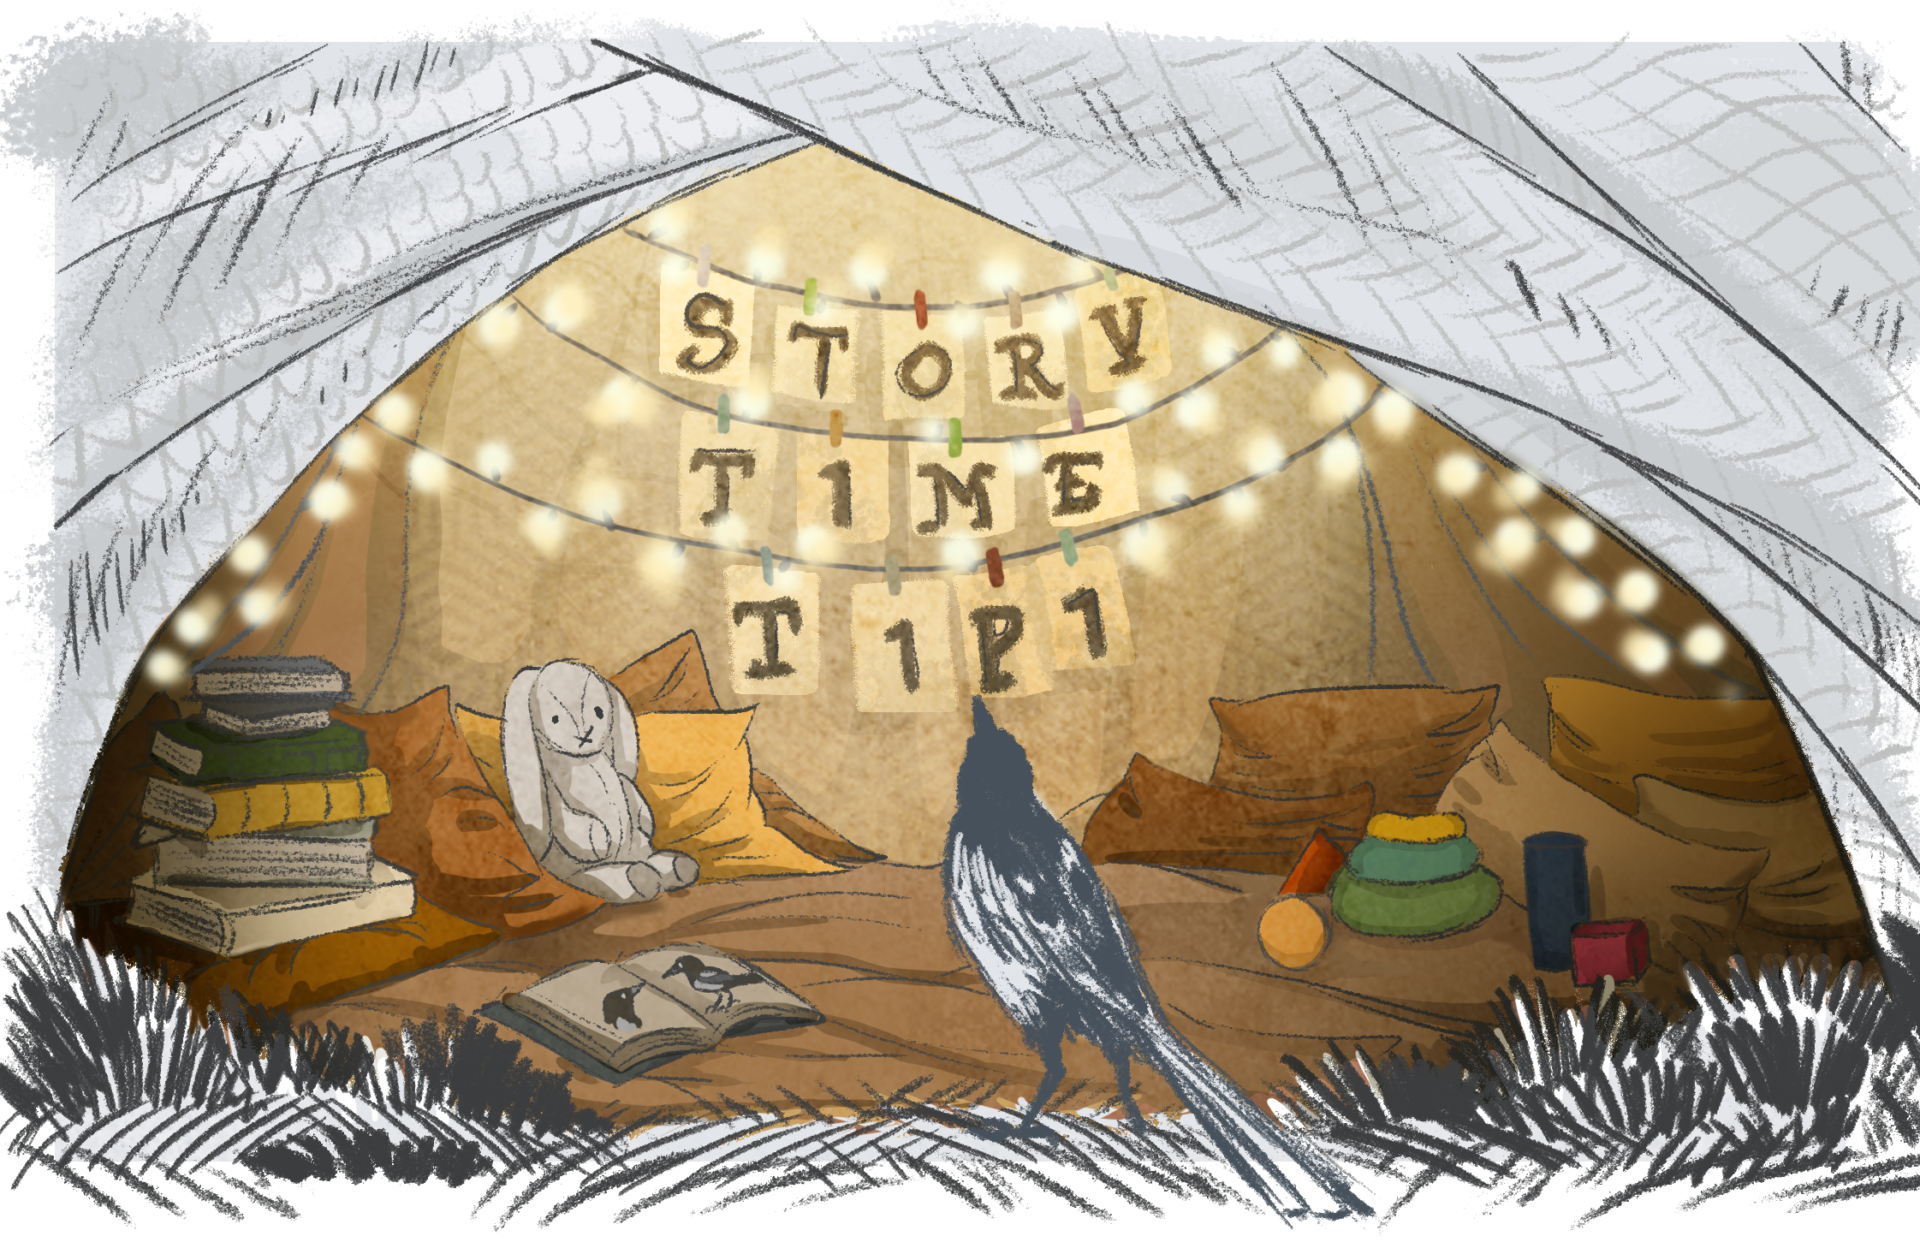 story time tipi poster shows a cosy nook with fairy lights and a crow looking up at the sign